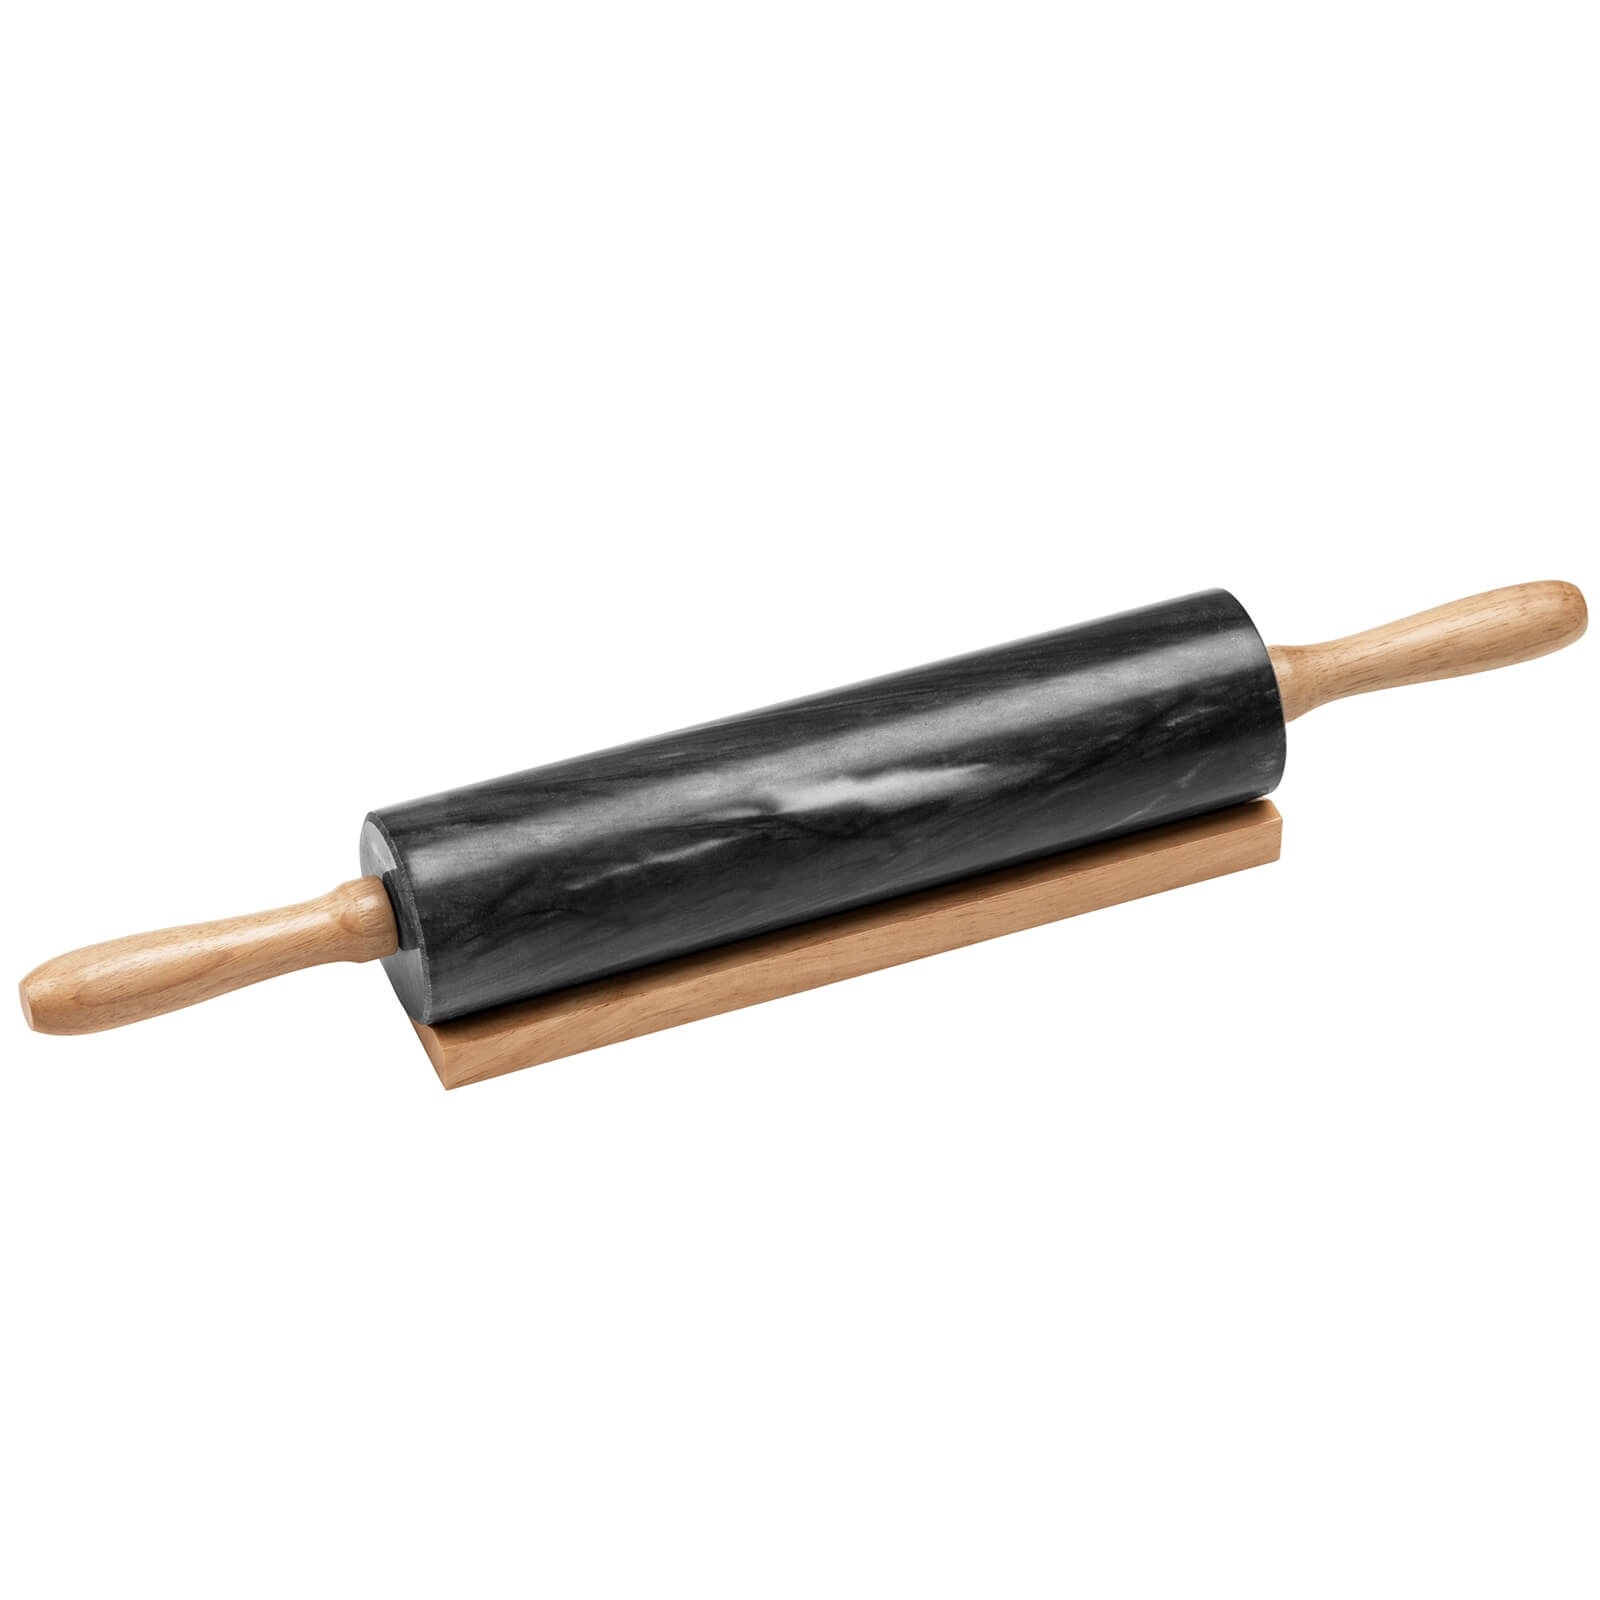 Black Marble Rolling Pin